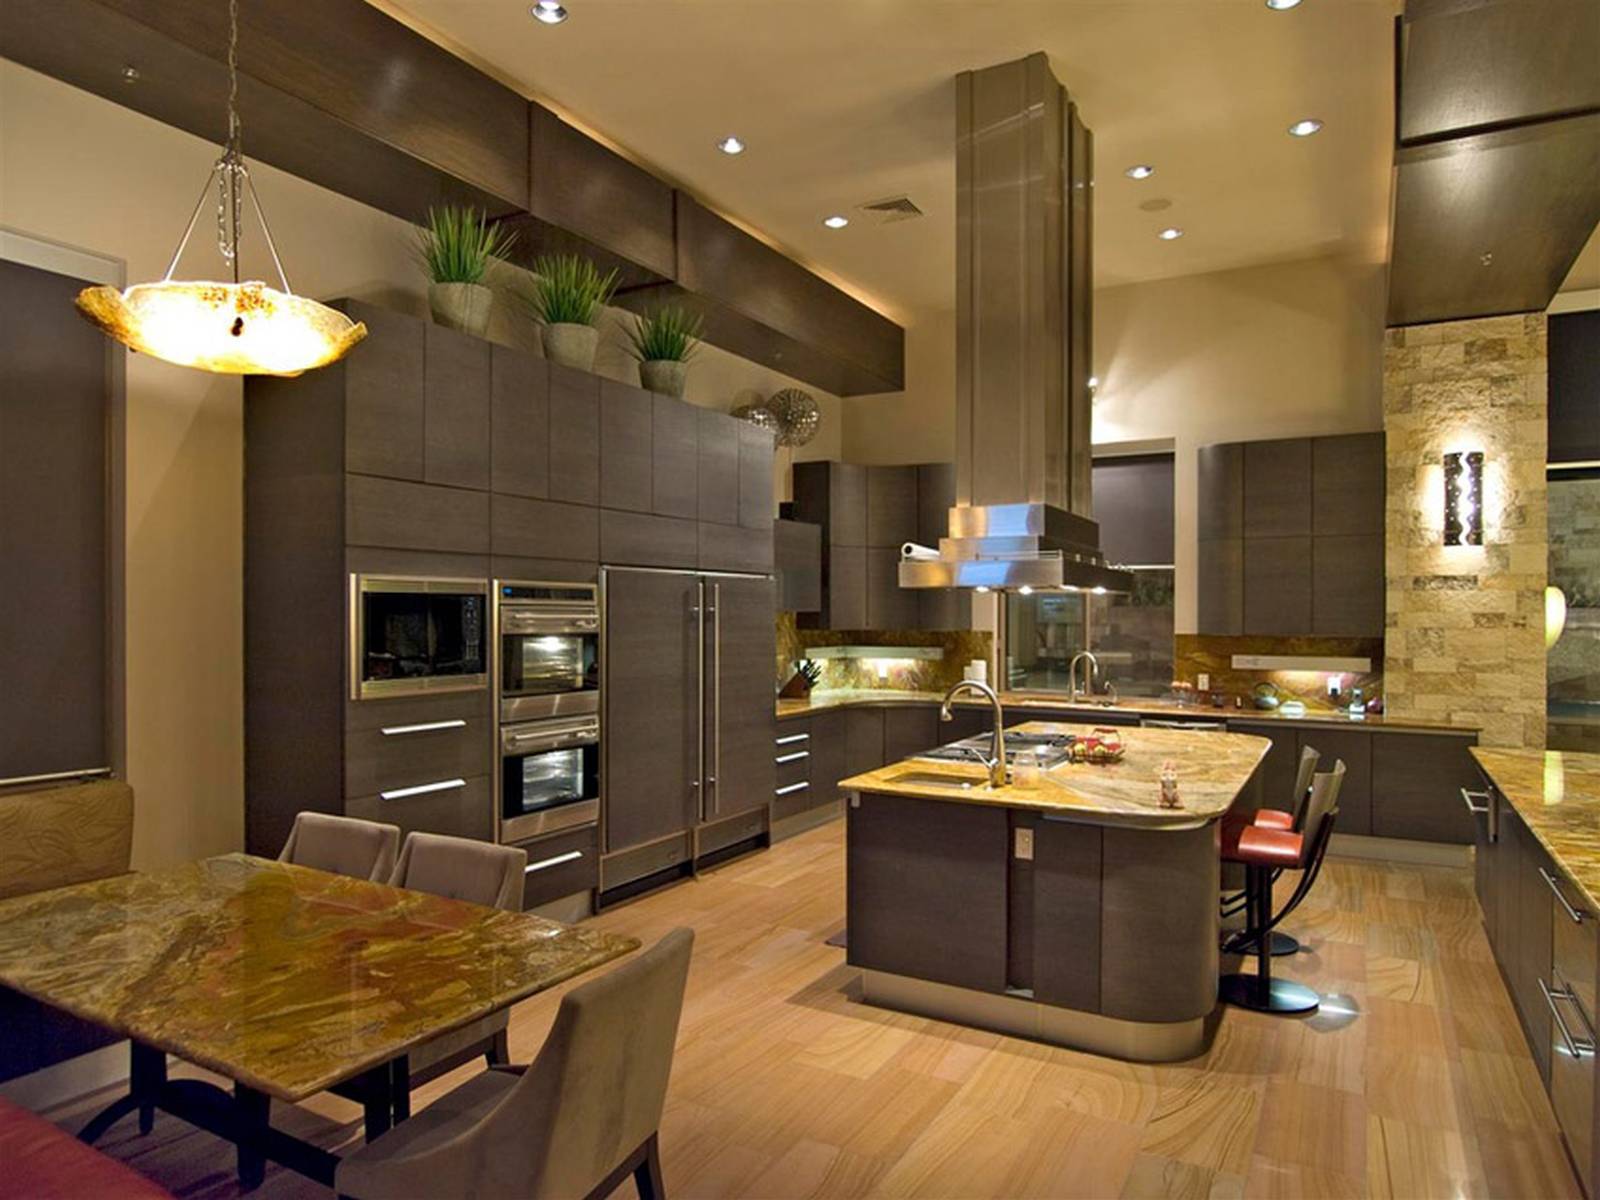 Contemporary Kitchen With High Ceilings Light Wood Floors